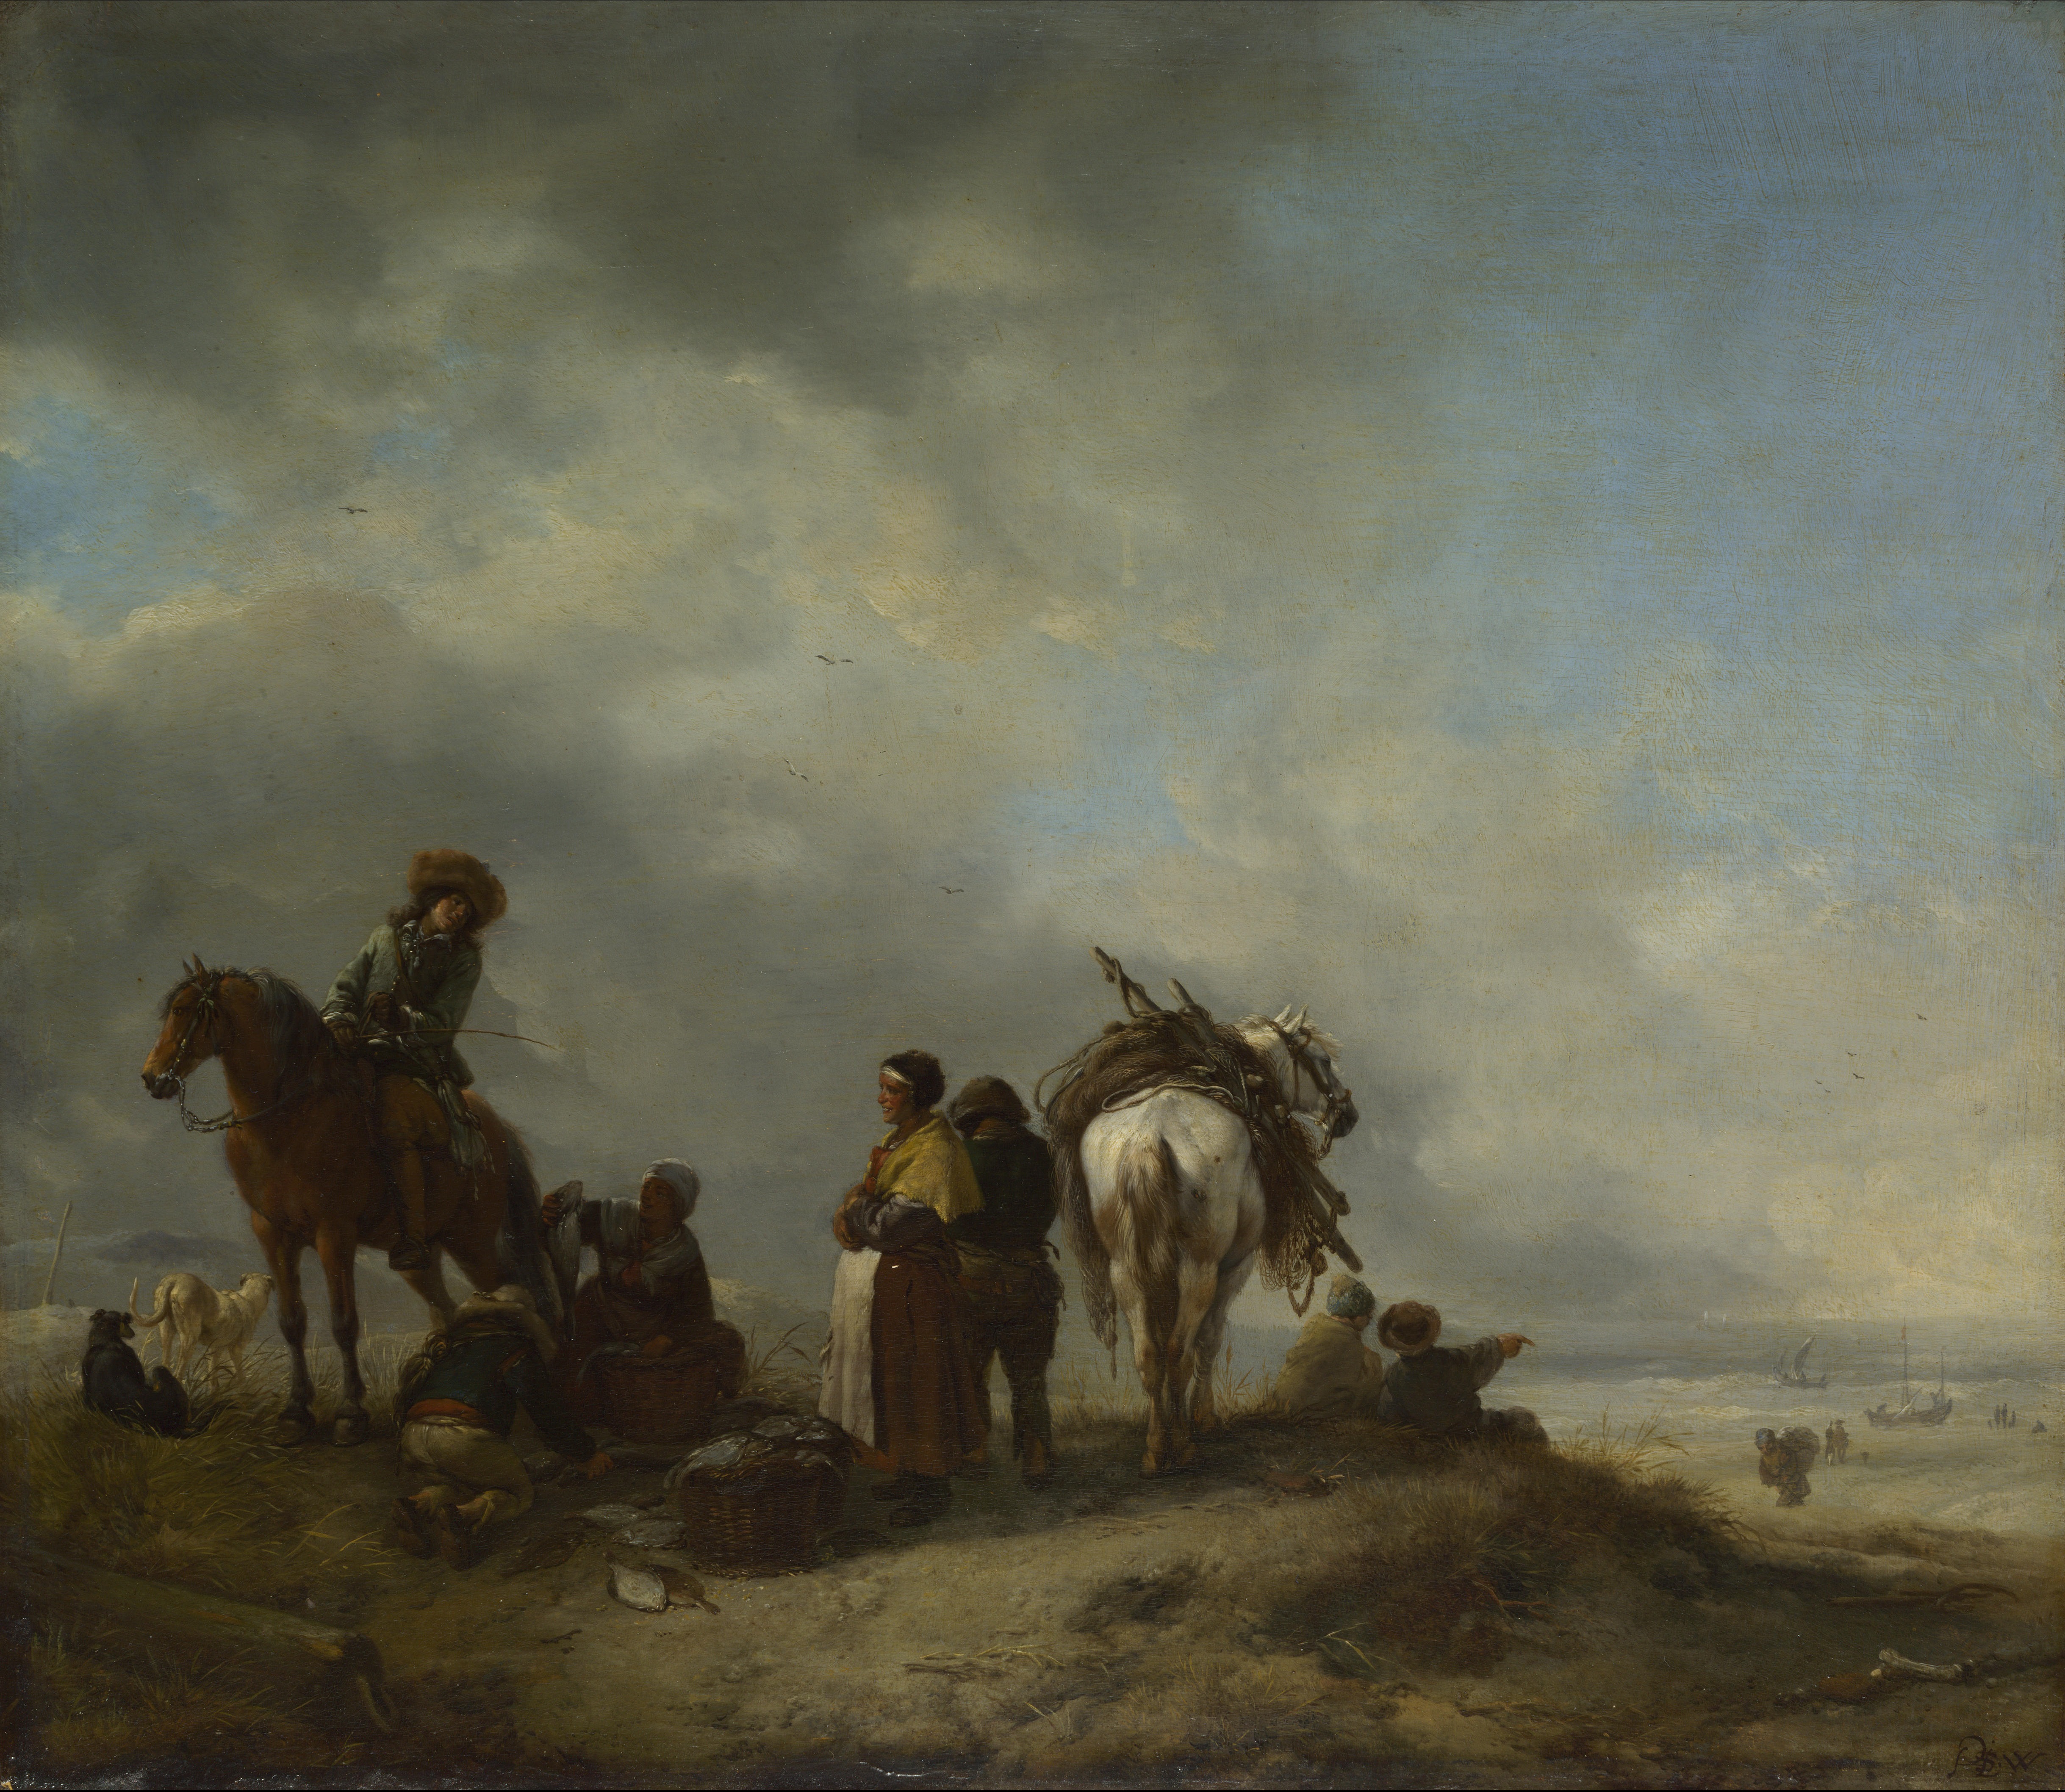 Philips Wouwerman - A View on a Seashore with Fishwives offering Fish to a Horseman (1650s)